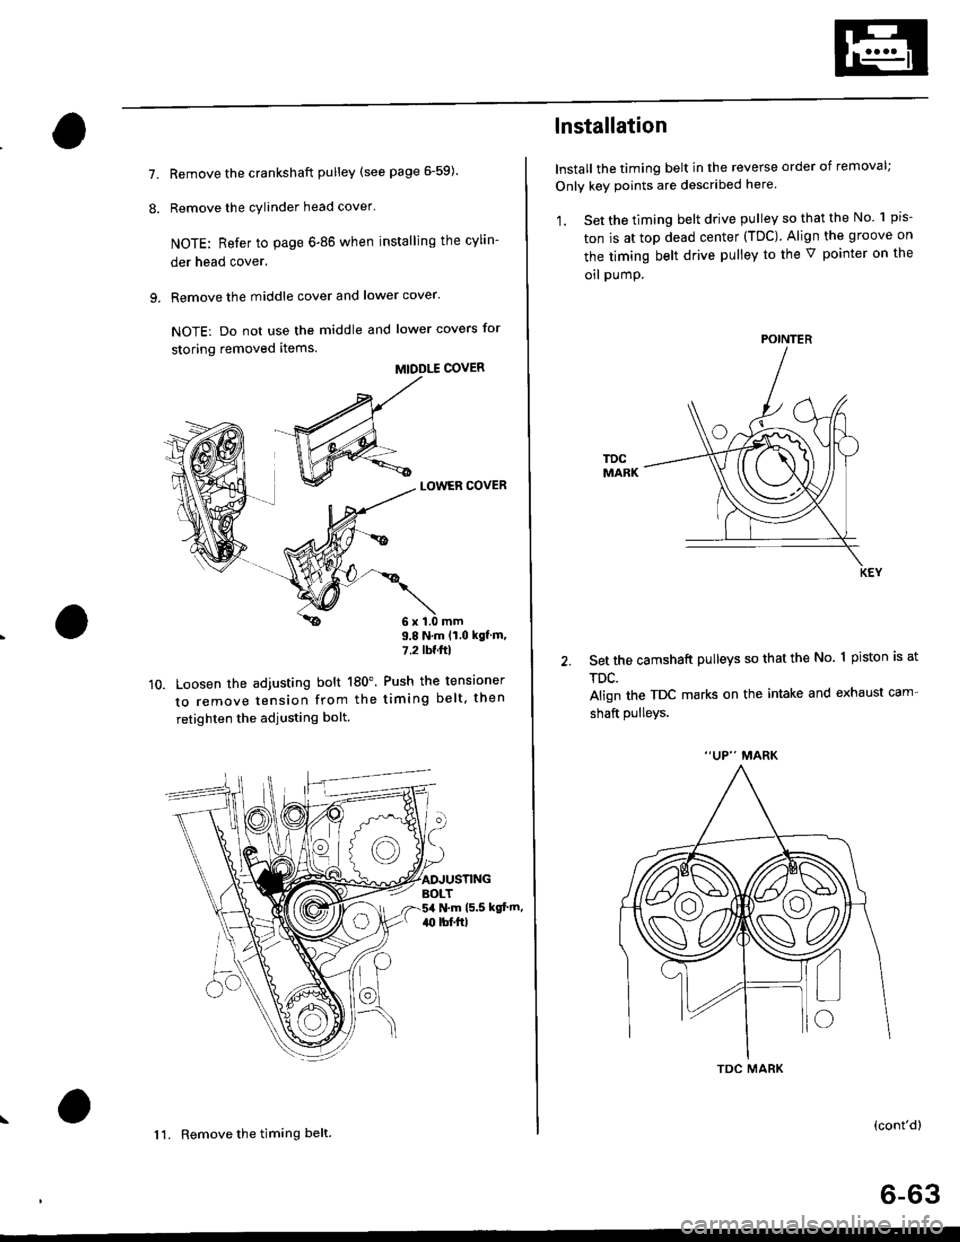 HONDA CIVIC 1996 6.G Owners Guide 7.
8.
Remove the crankshaft pulley (see page 6-59).
Remove the cylinder head cover
NOTE: Refer to page 6-86 when installing the cylin-
der head cover.
Remove the middle cover and lower cover.
NOTE: D